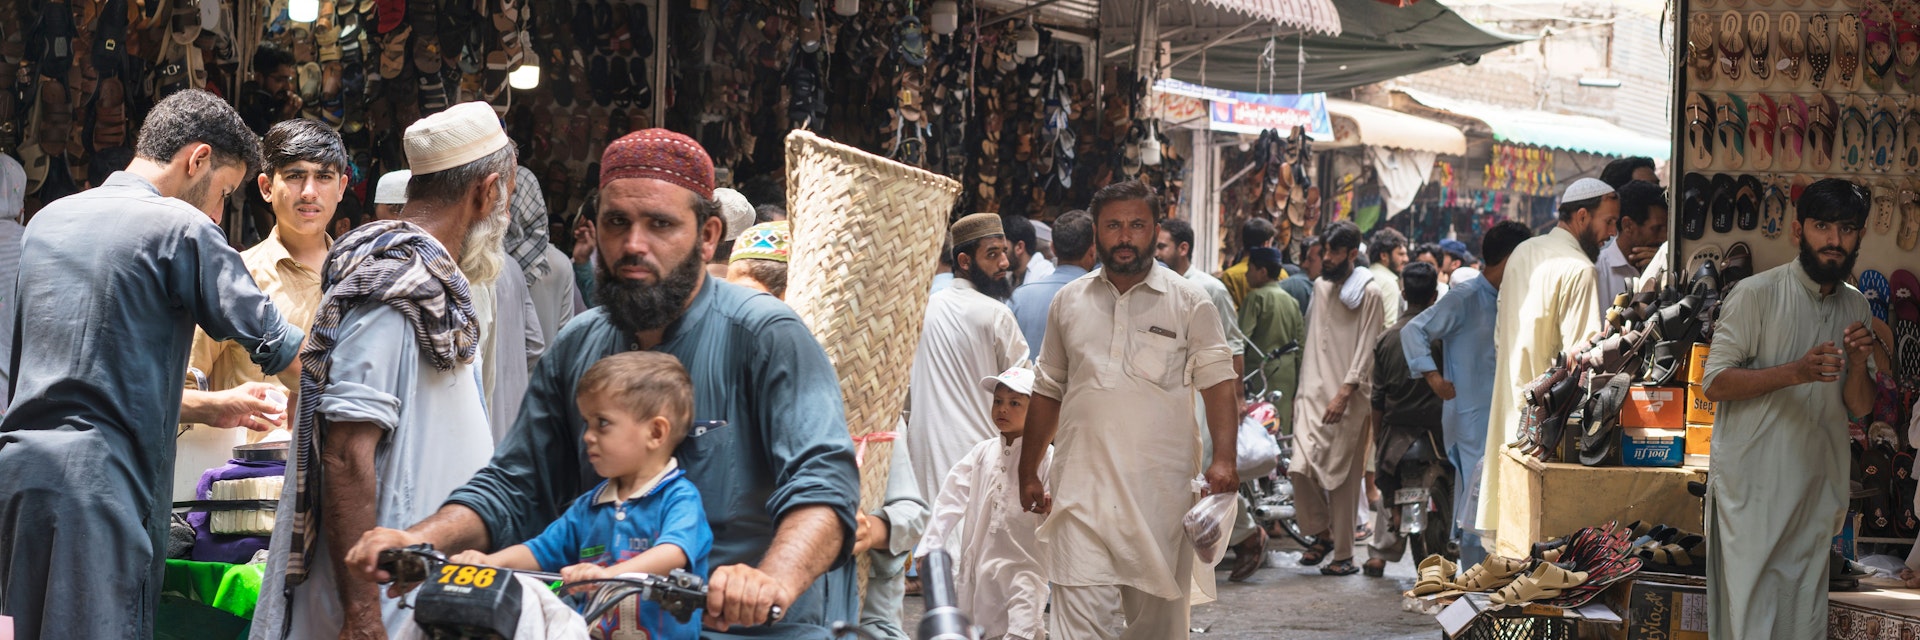 Karkhanai Bazaar, Peshawar/Pakistan-August 11, 2019: man and his son  are driving bike at the streets of Karkhanai bazaar (smugglers bazaar), Peshawar, Pakistan; Shutterstock ID 1500892436; your: Bridget Brown; gl: 65050; netsuite: Online Editorial; full: POI Image Update